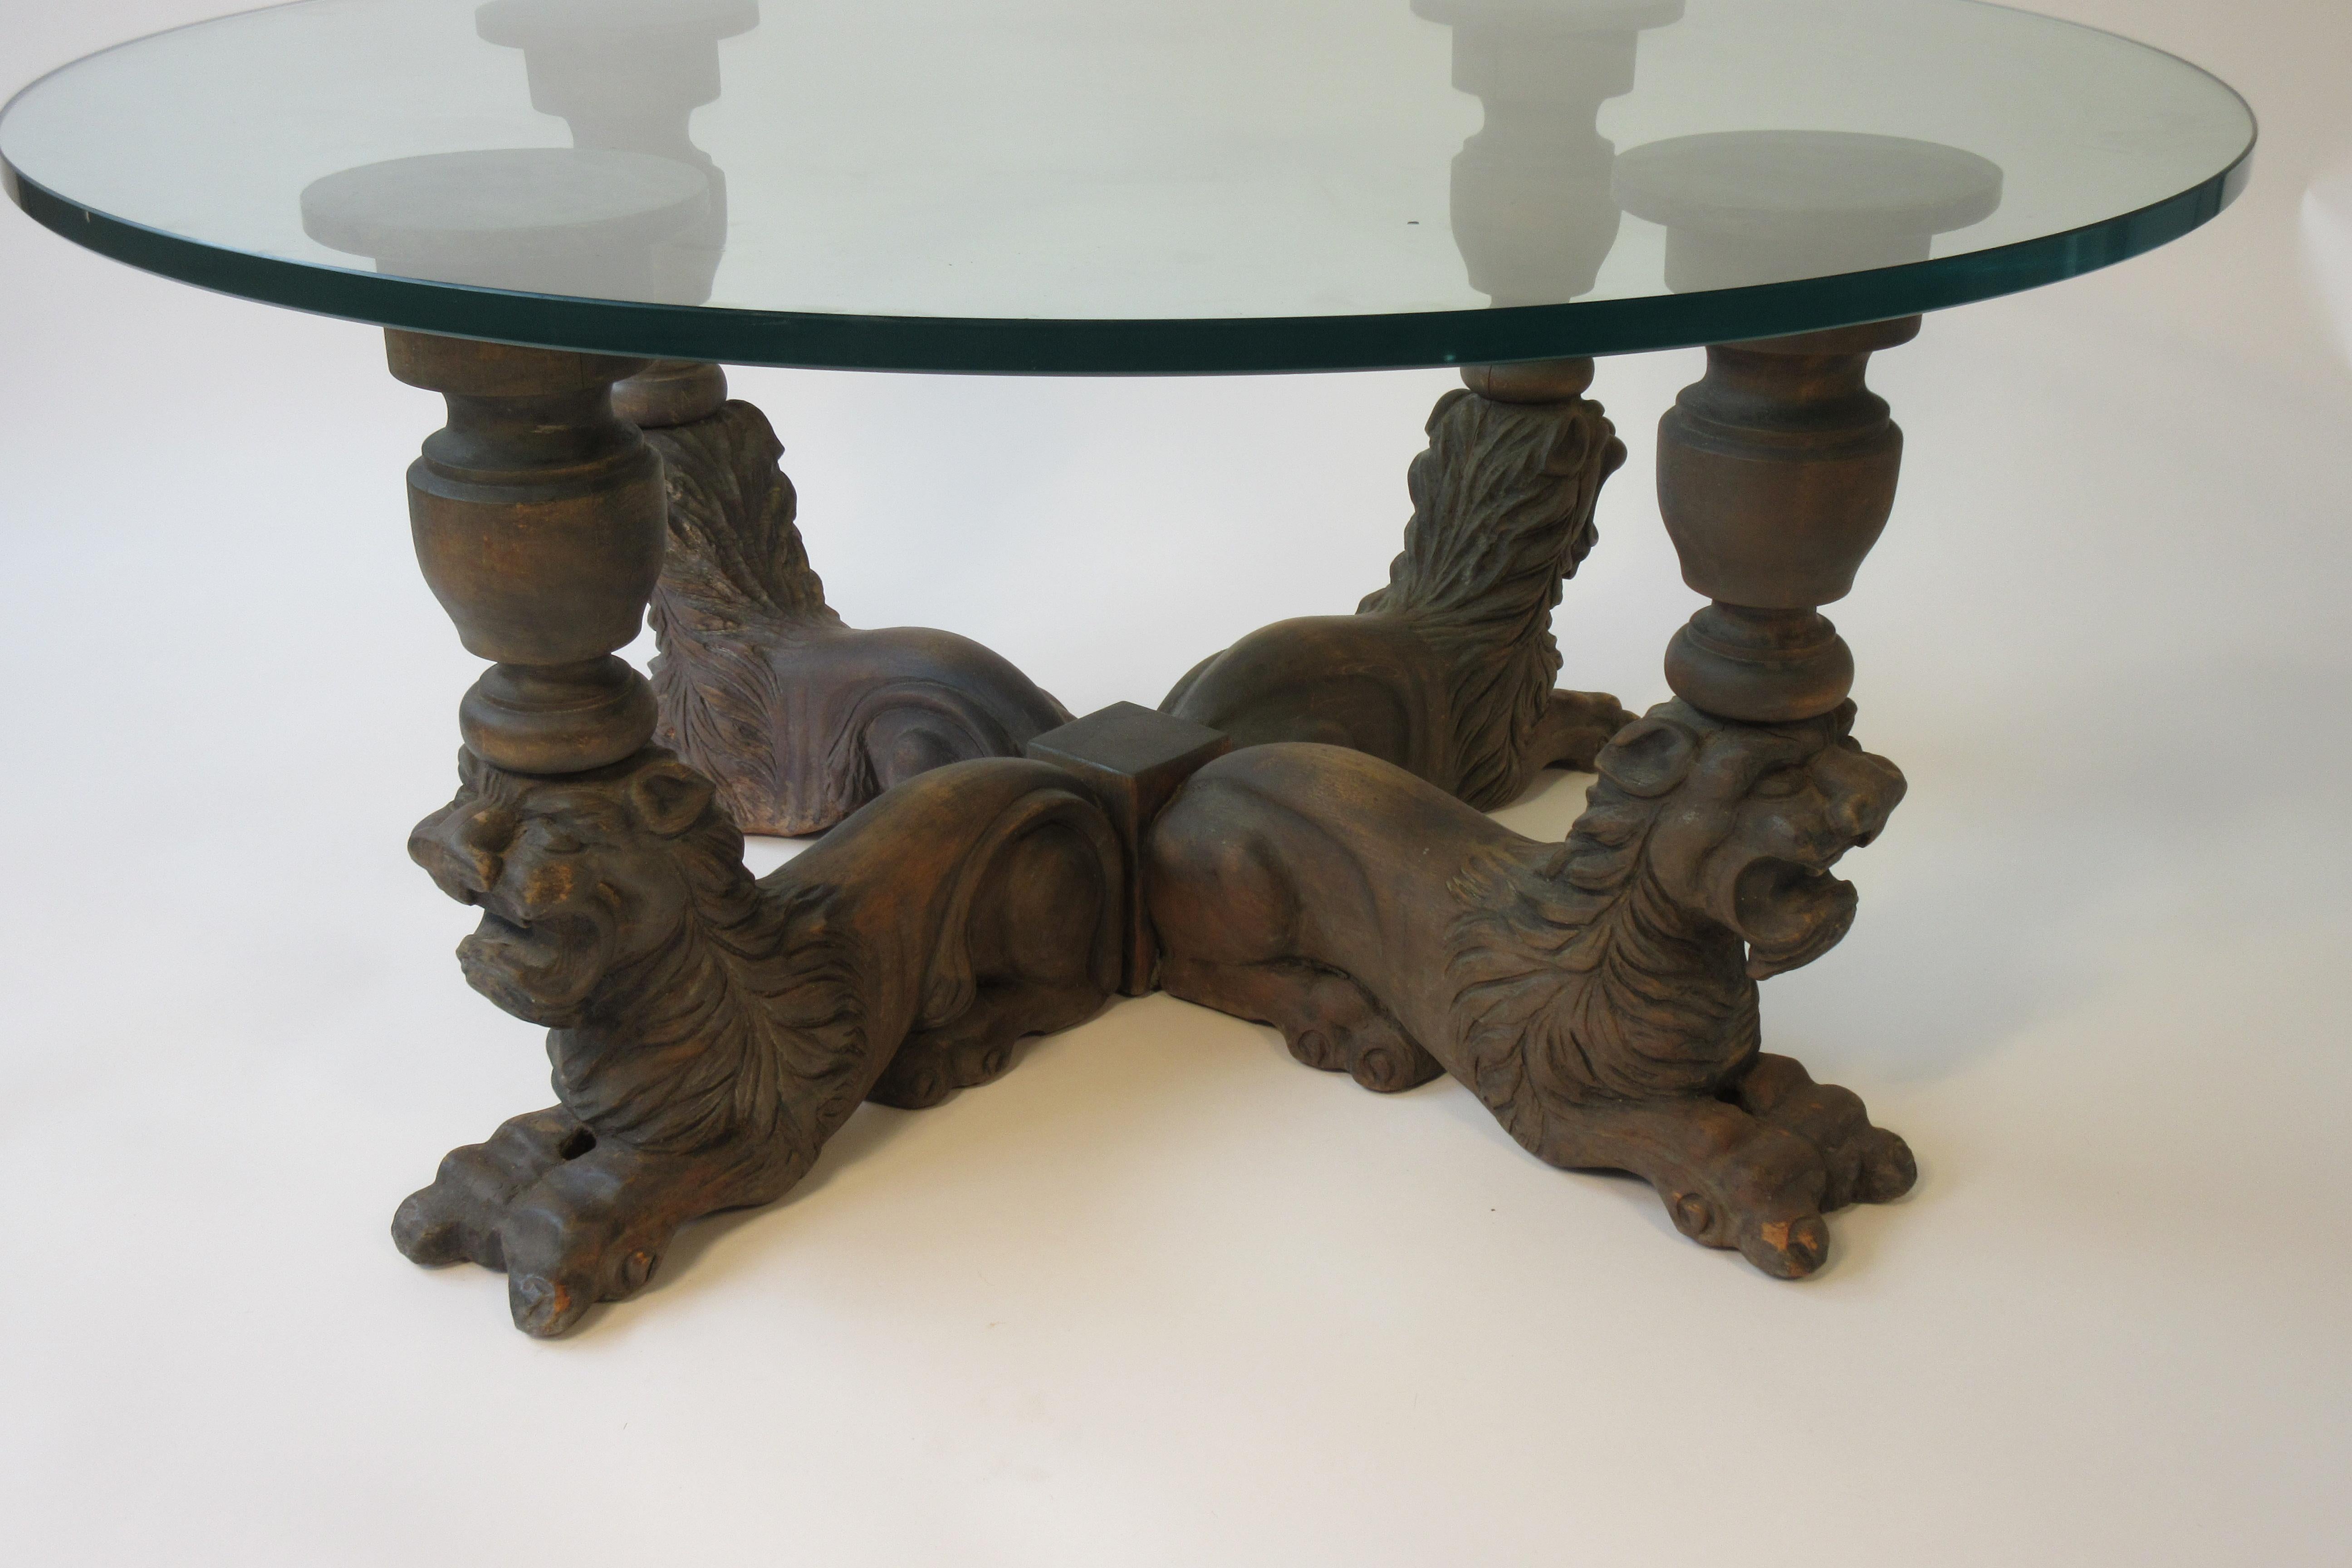 1950s carved wood lion coffee table with glass top. Out of a NYC penthouse apartment.